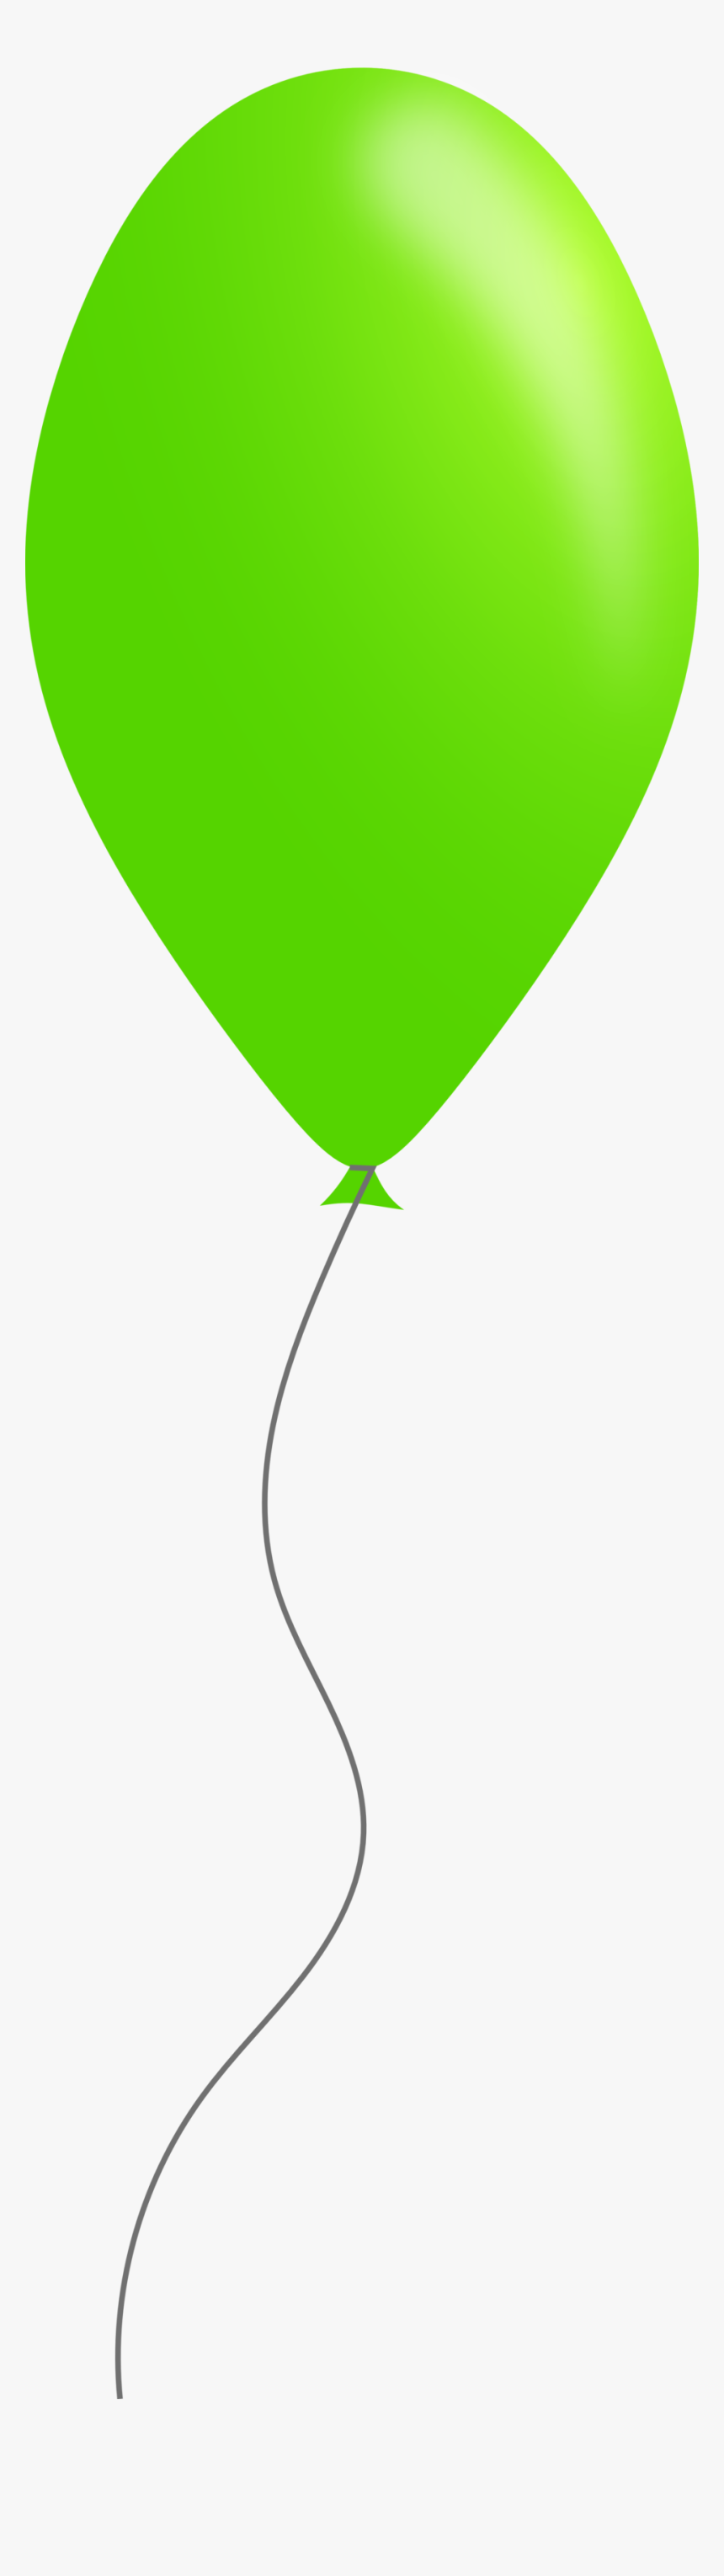 Green Balloon Png, Transparent Png, Free Download